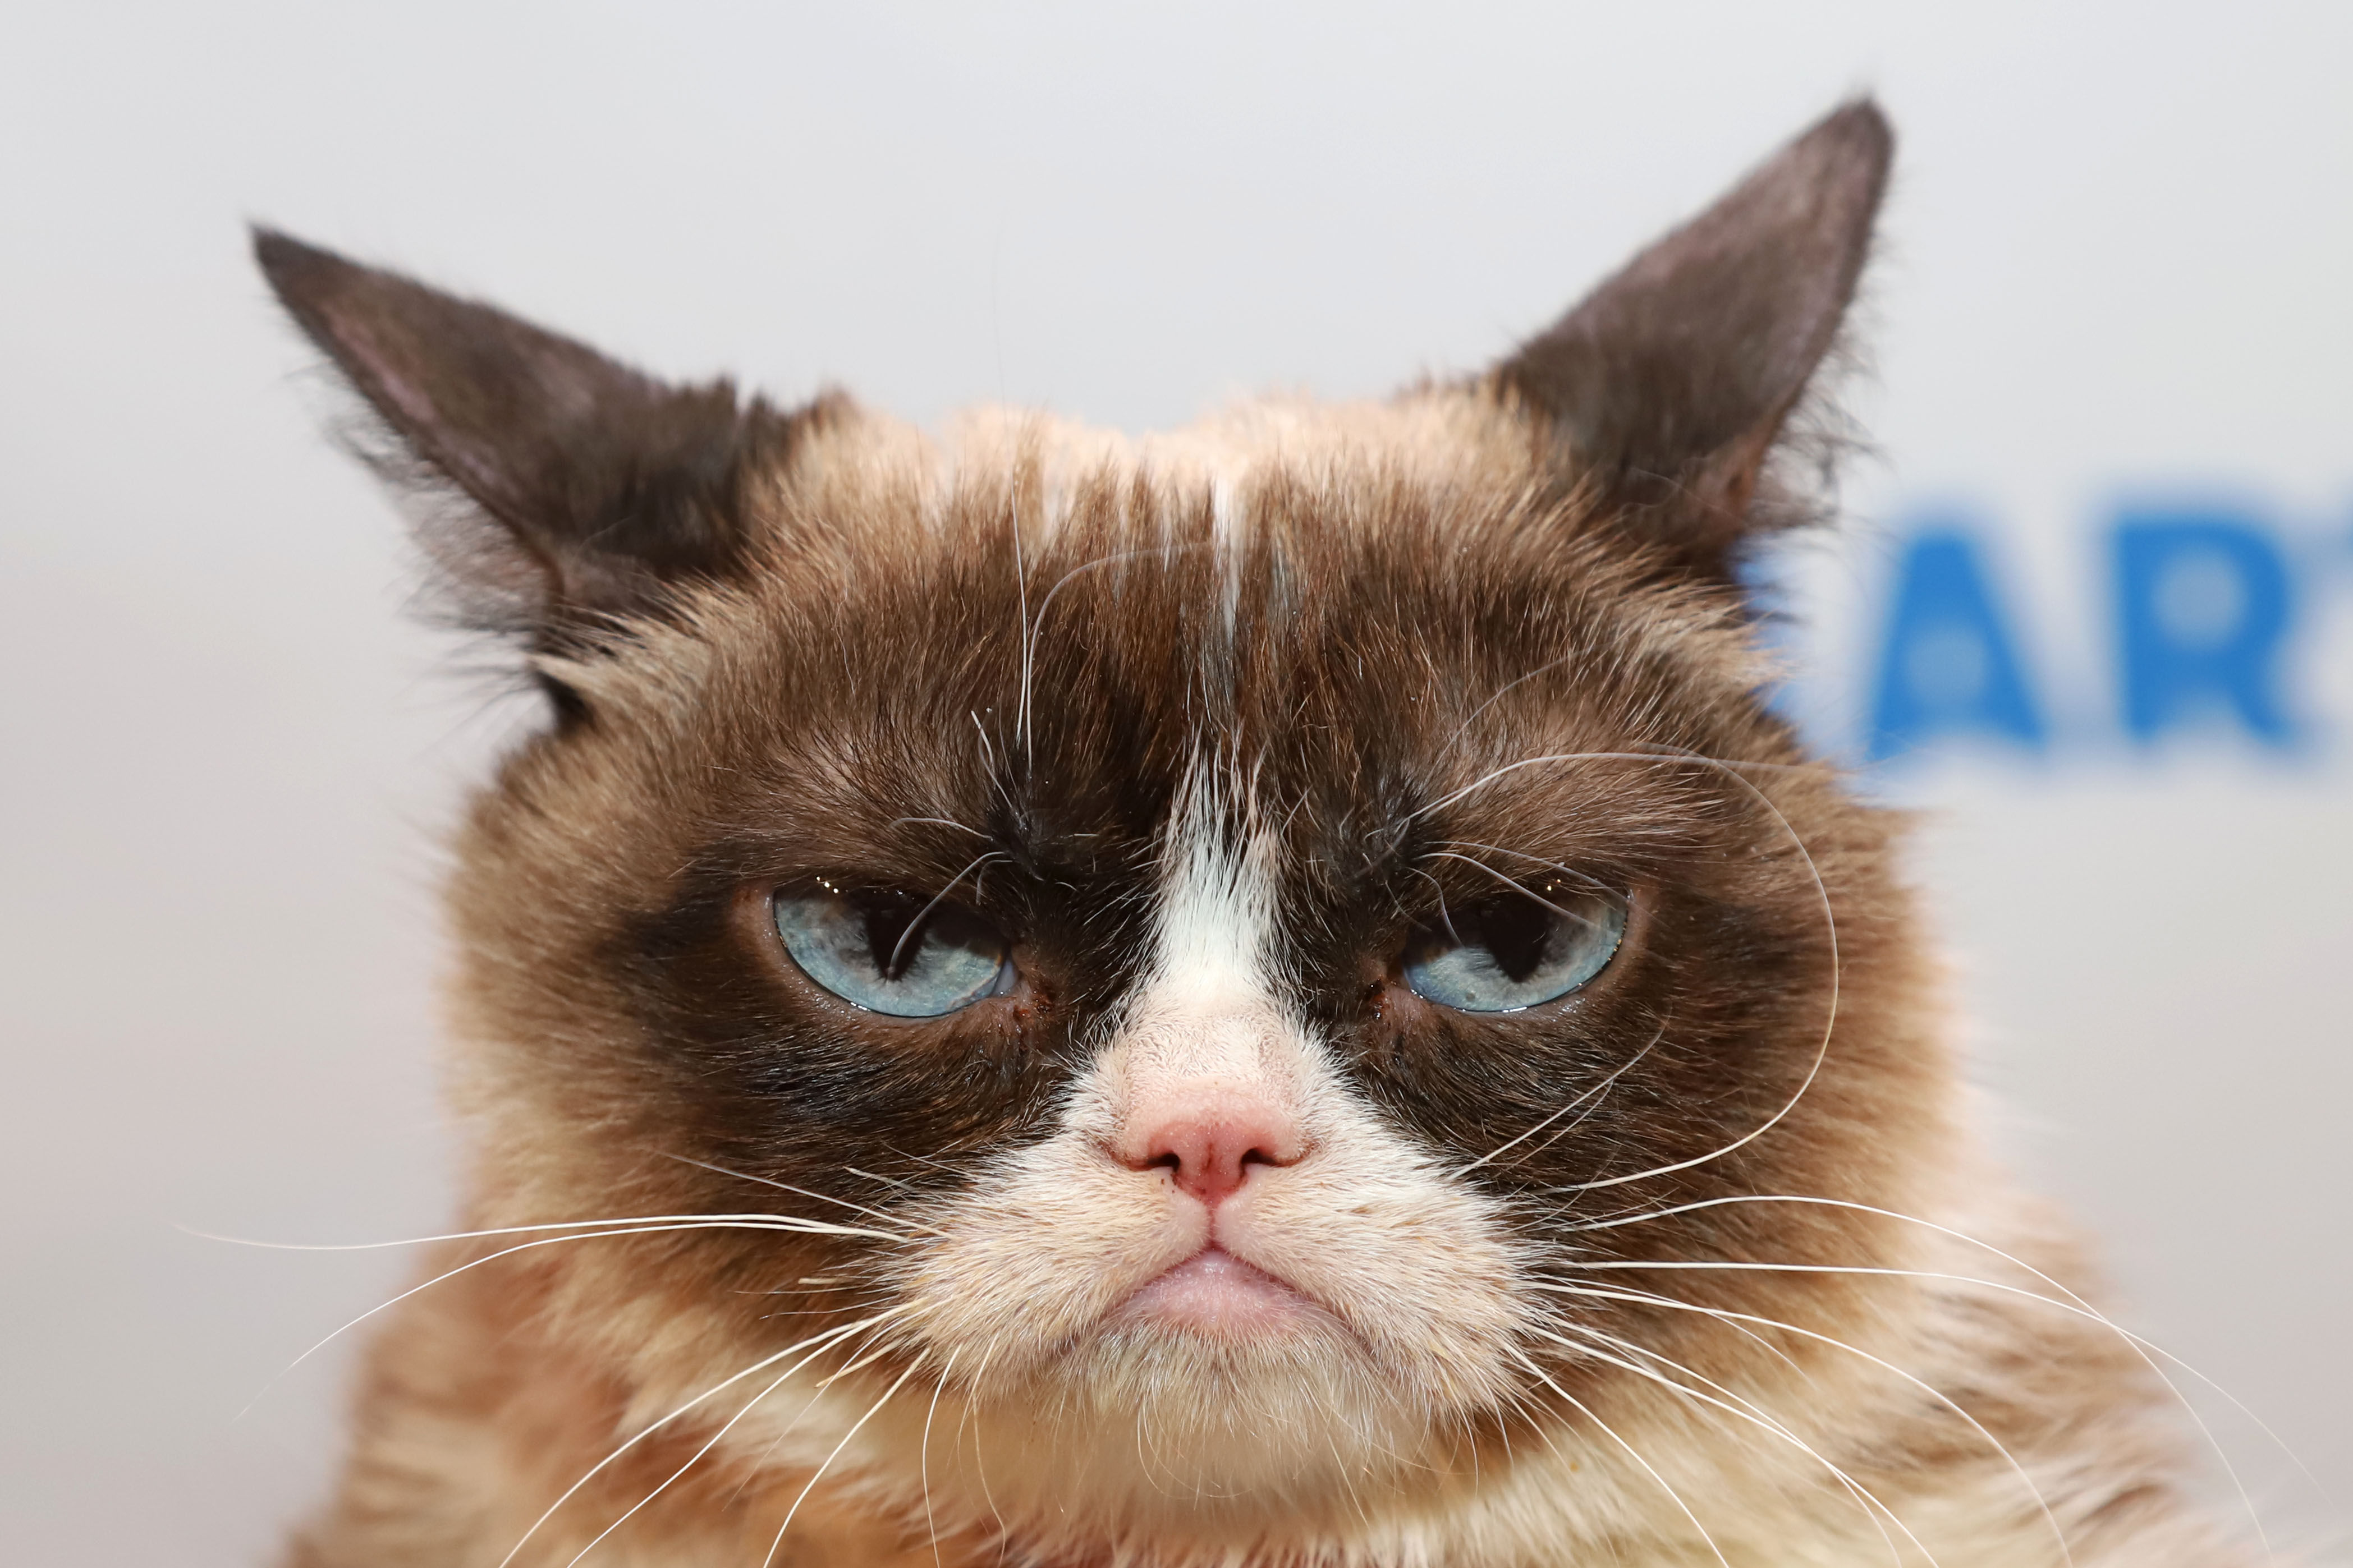 Internet's Famous Grumpy Cat Dies at Age 7 | Live Science